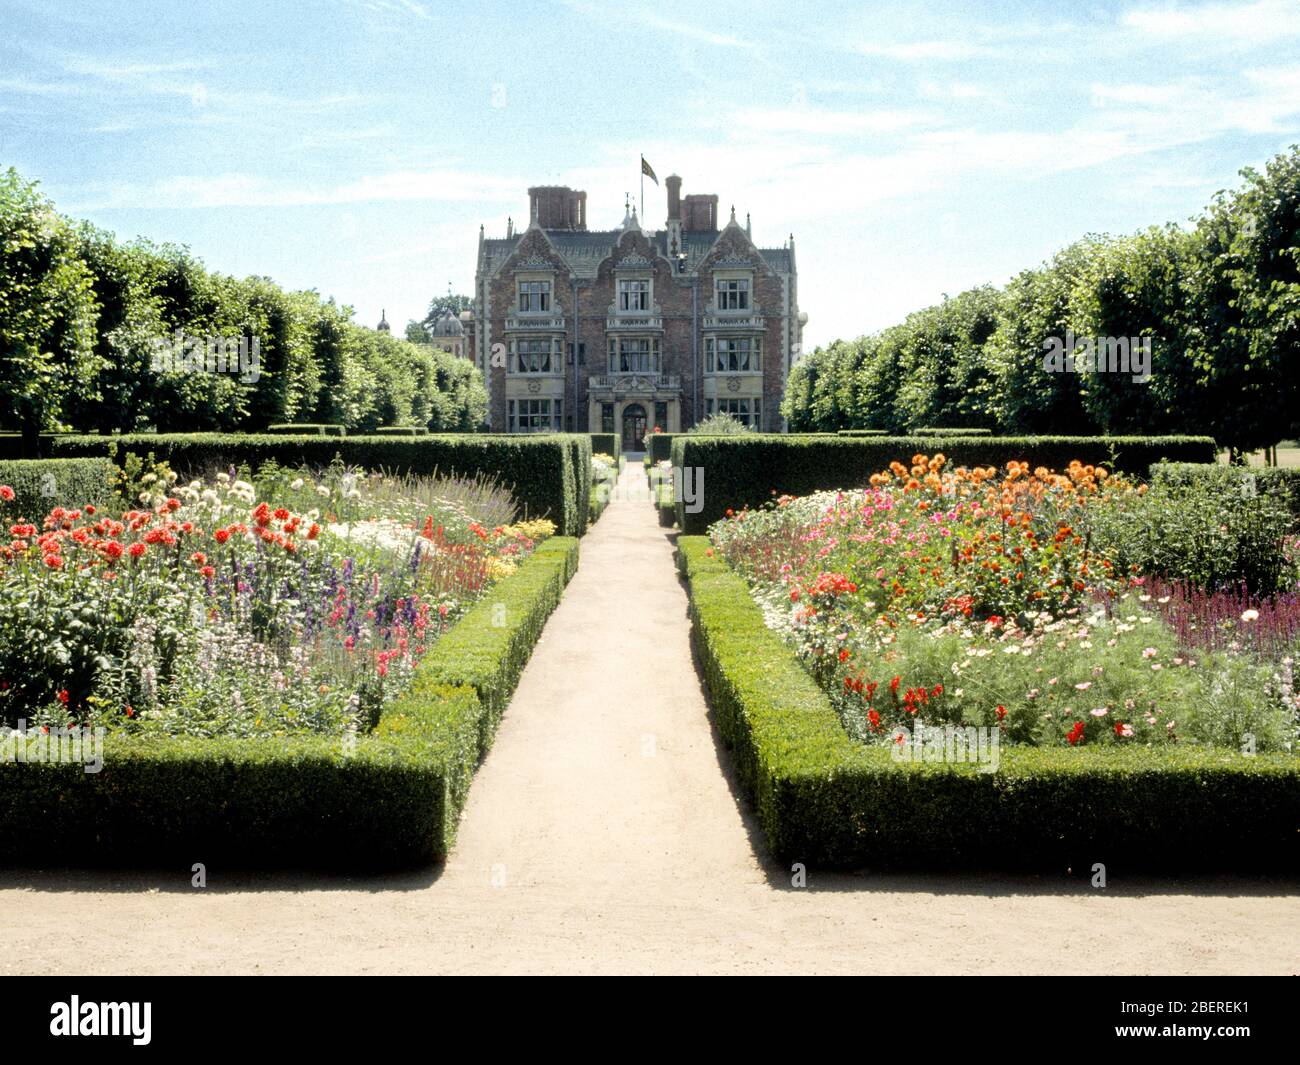 The beautiful gardens at Sandringham House on the Sandringham Estate country home of HM Queen Elizabeth II, Norfolk, England 1994 Stock Photo